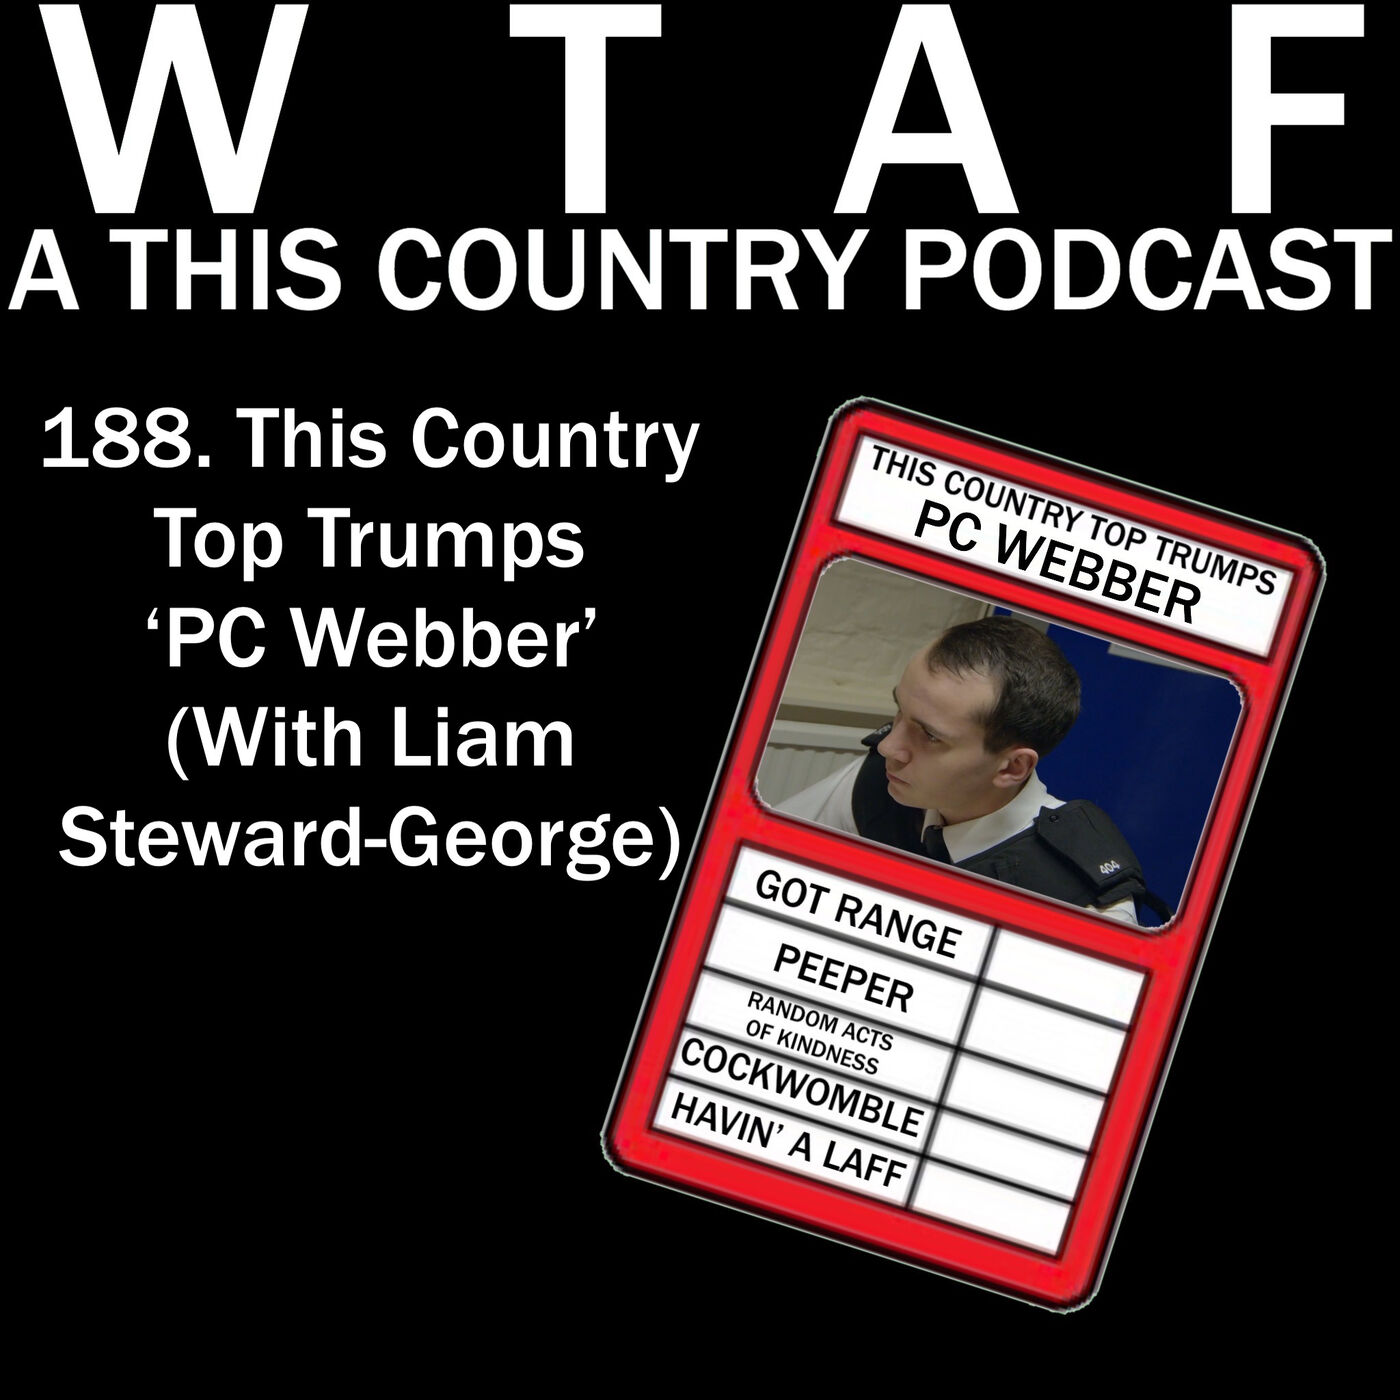 188. This Country Top Trumps - PC Webber (With Liam Steward-George)